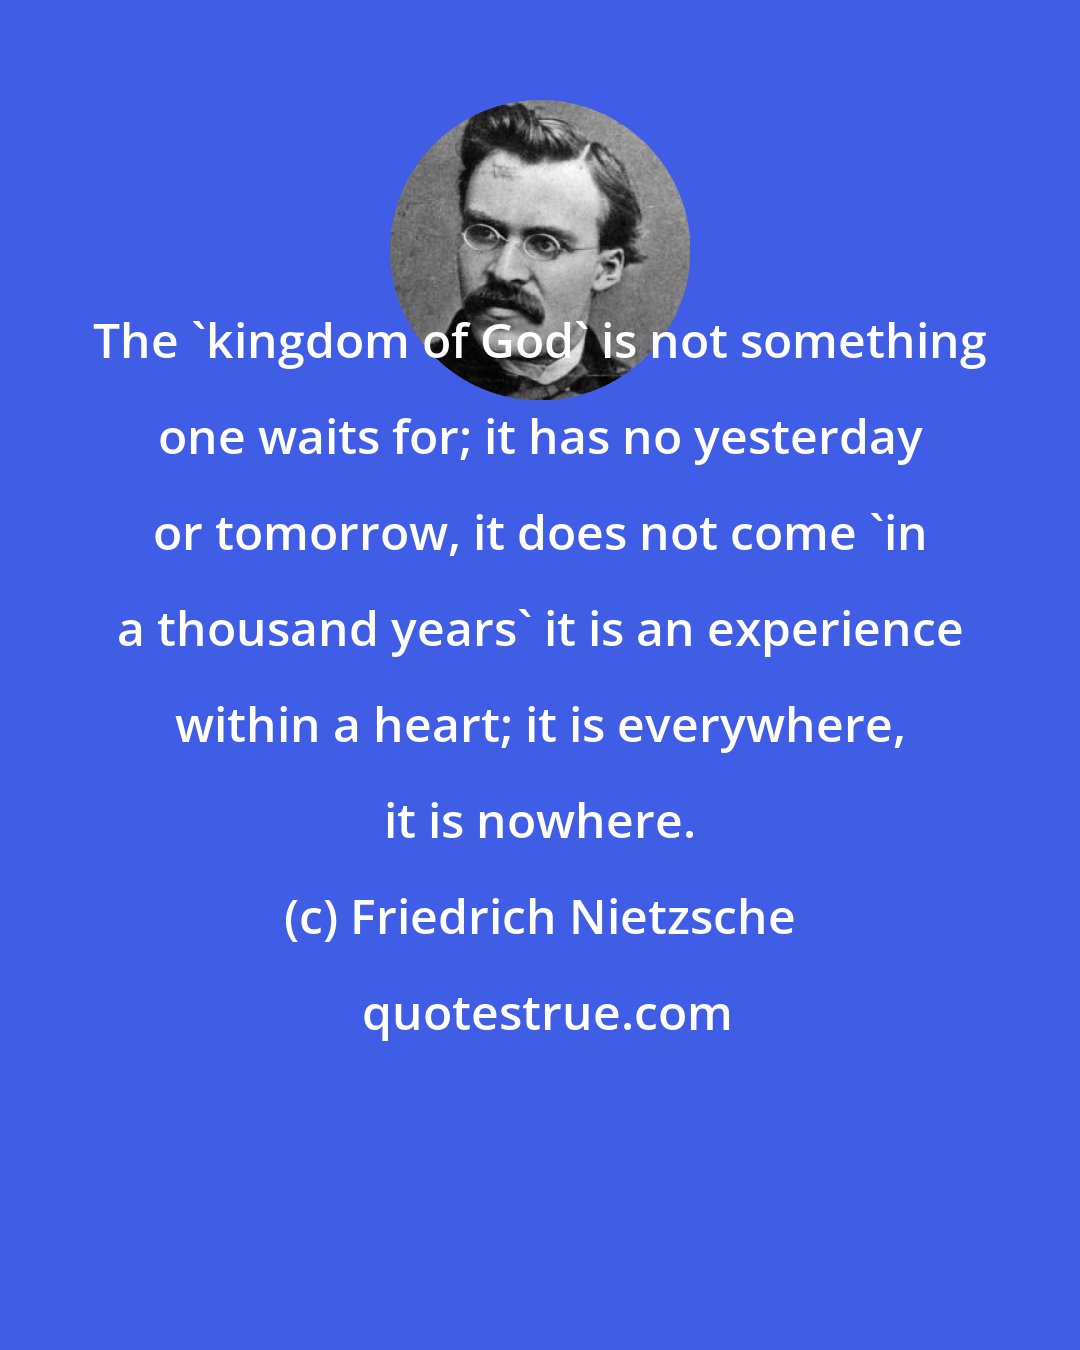 Friedrich Nietzsche: The 'kingdom of God' is not something one waits for; it has no yesterday or tomorrow, it does not come 'in a thousand years' it is an experience within a heart; it is everywhere, it is nowhere.